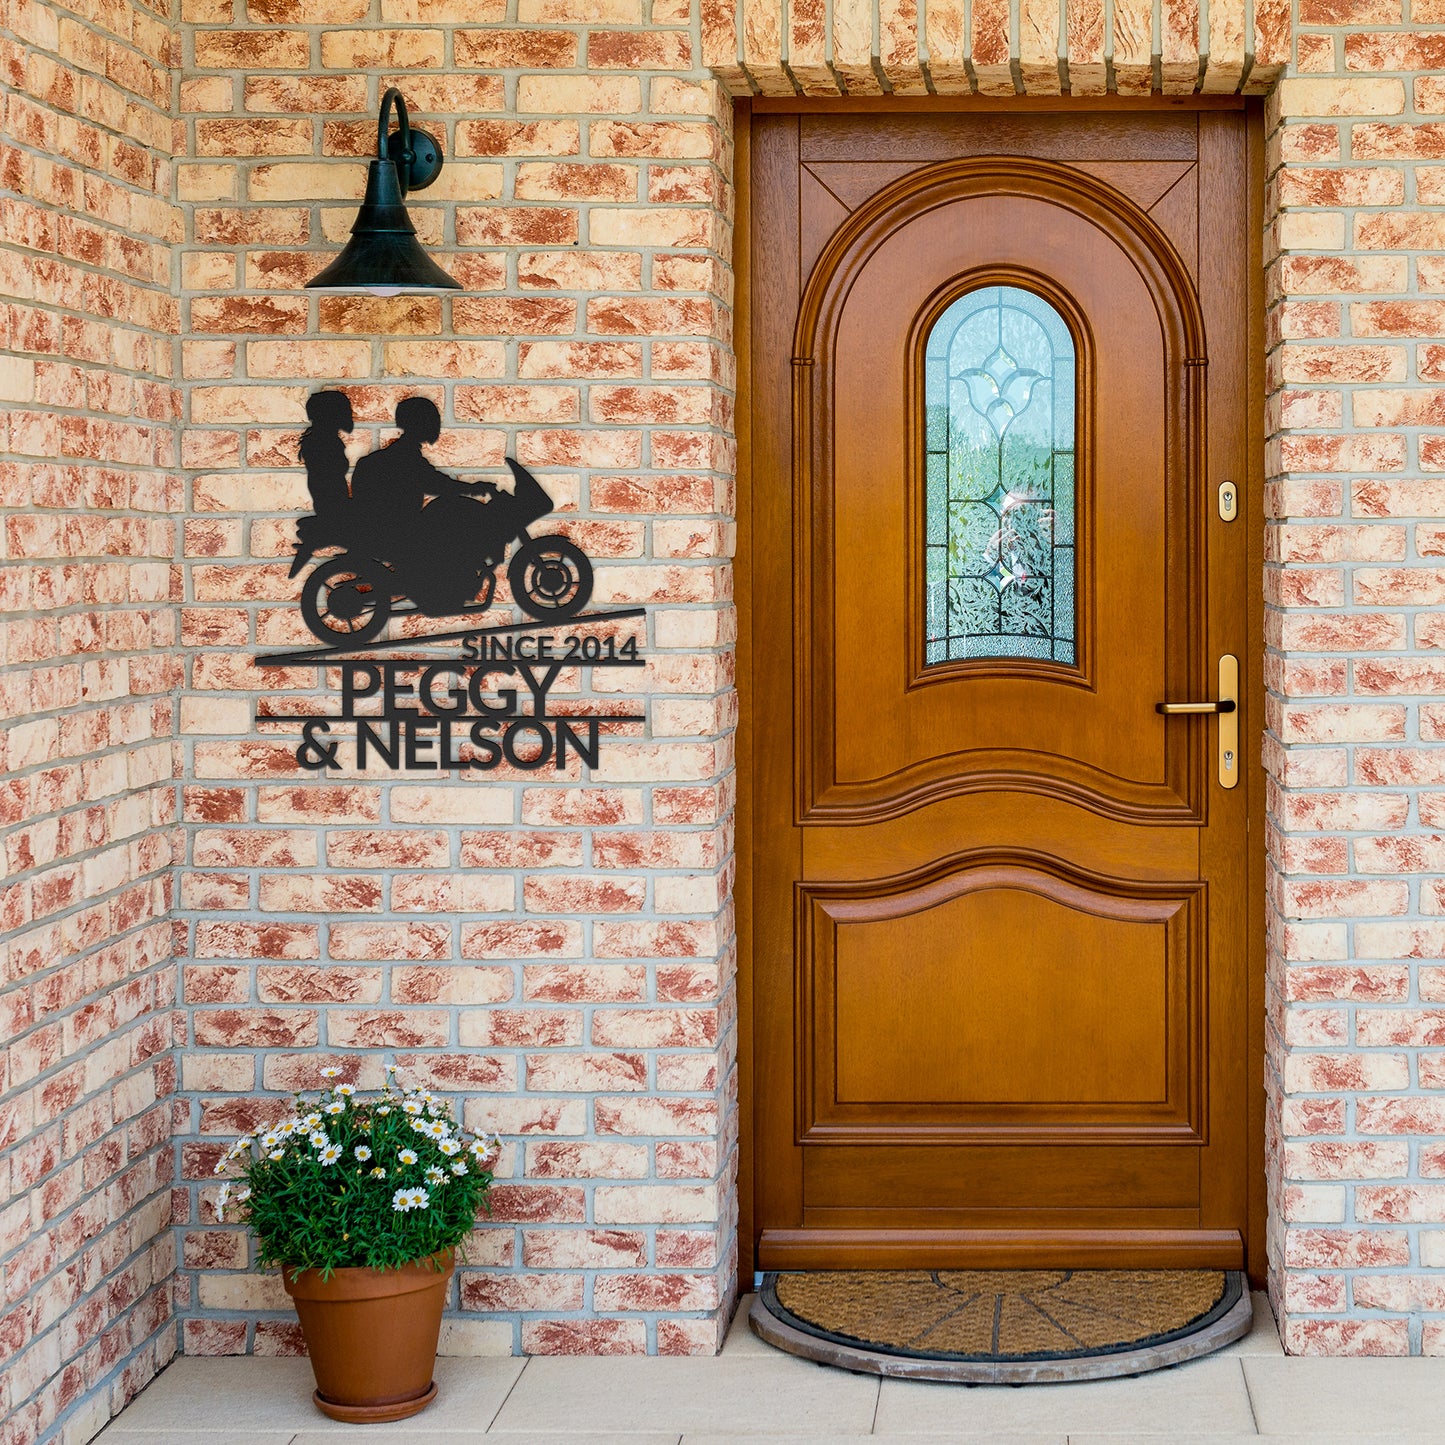 A wooden front door with a stained glass window, set in a brick wall. Next to the door, a Custom Motorcycle Couple Metallic Wall Art featuring a motorcycle, with the names "Peg".